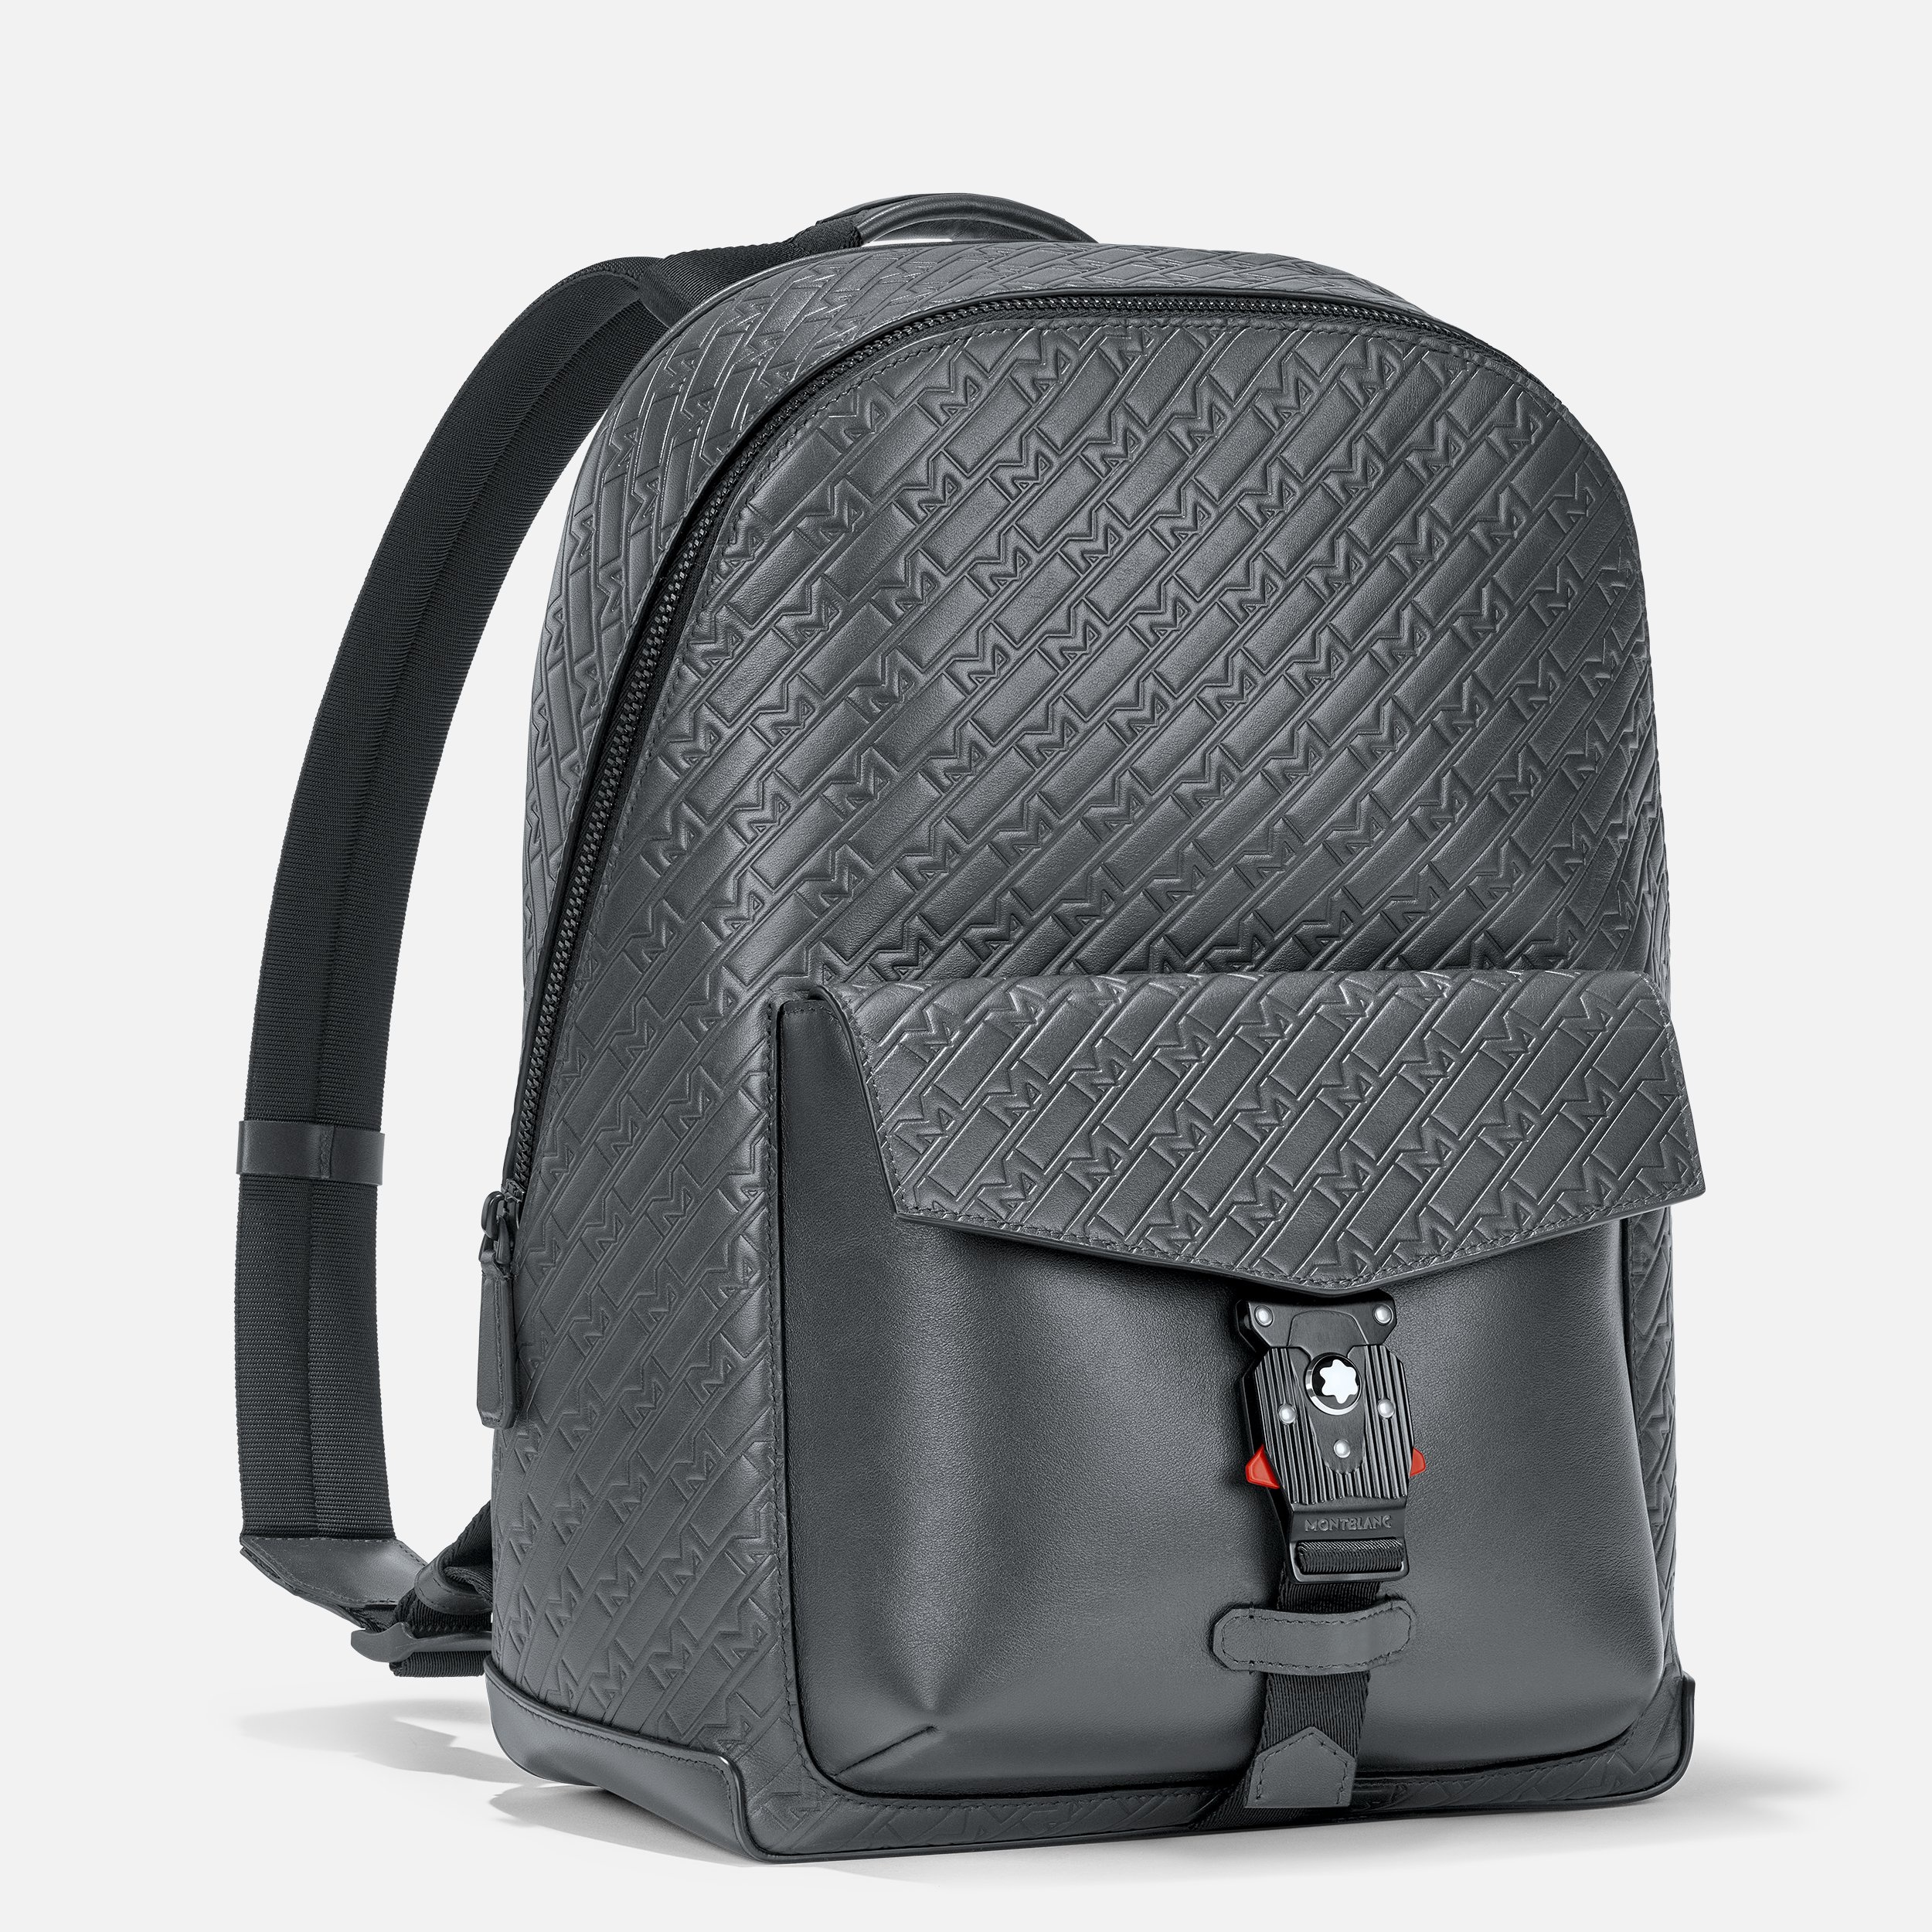 Montblanc M_Gram 4810 backpack with M LOCK 4810 buckle - 2